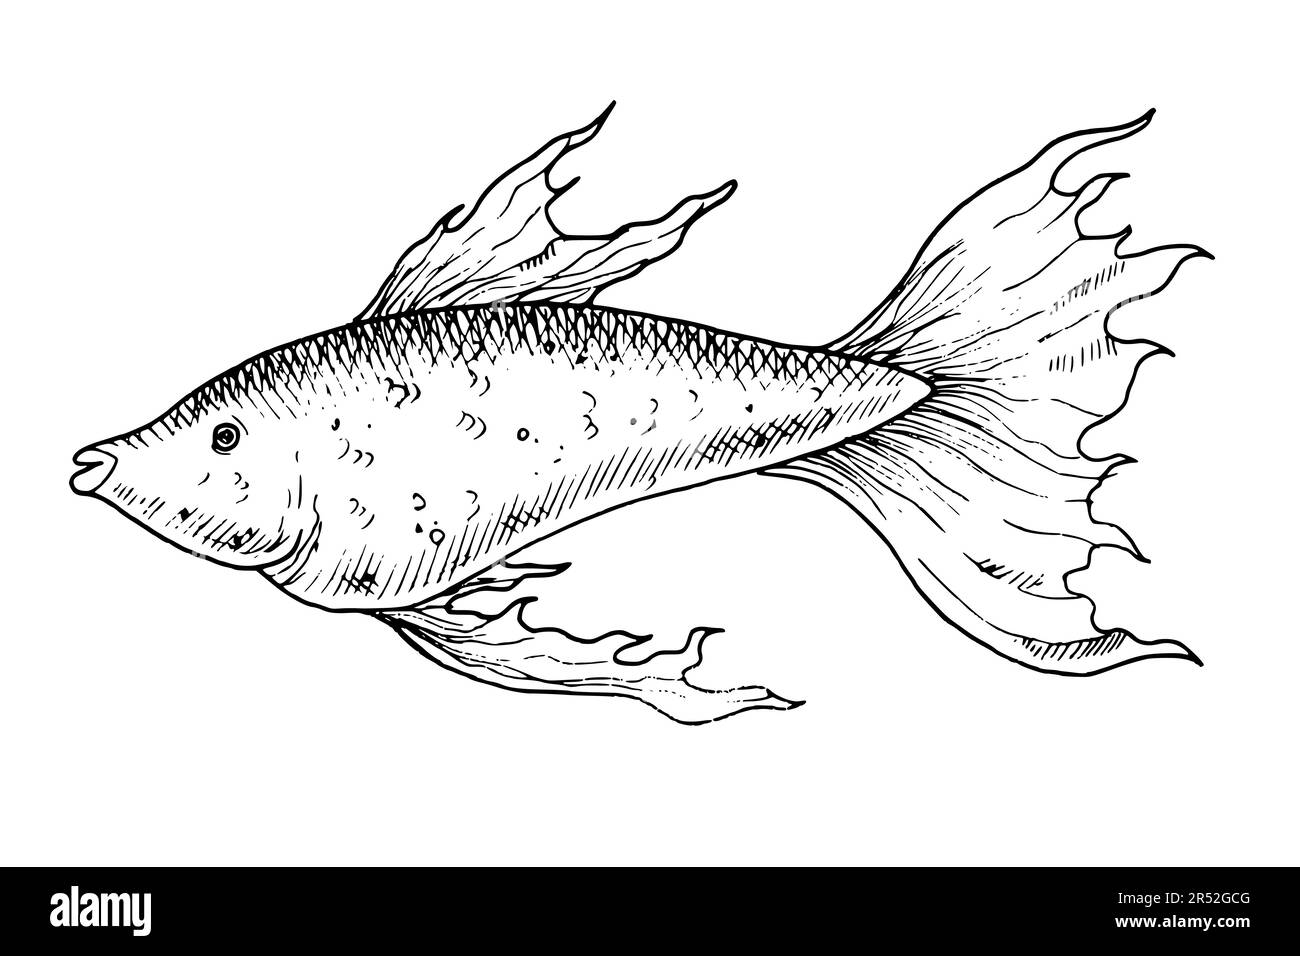 How to Draw a Small Fish  Easy Drawing Tutorial For Kids